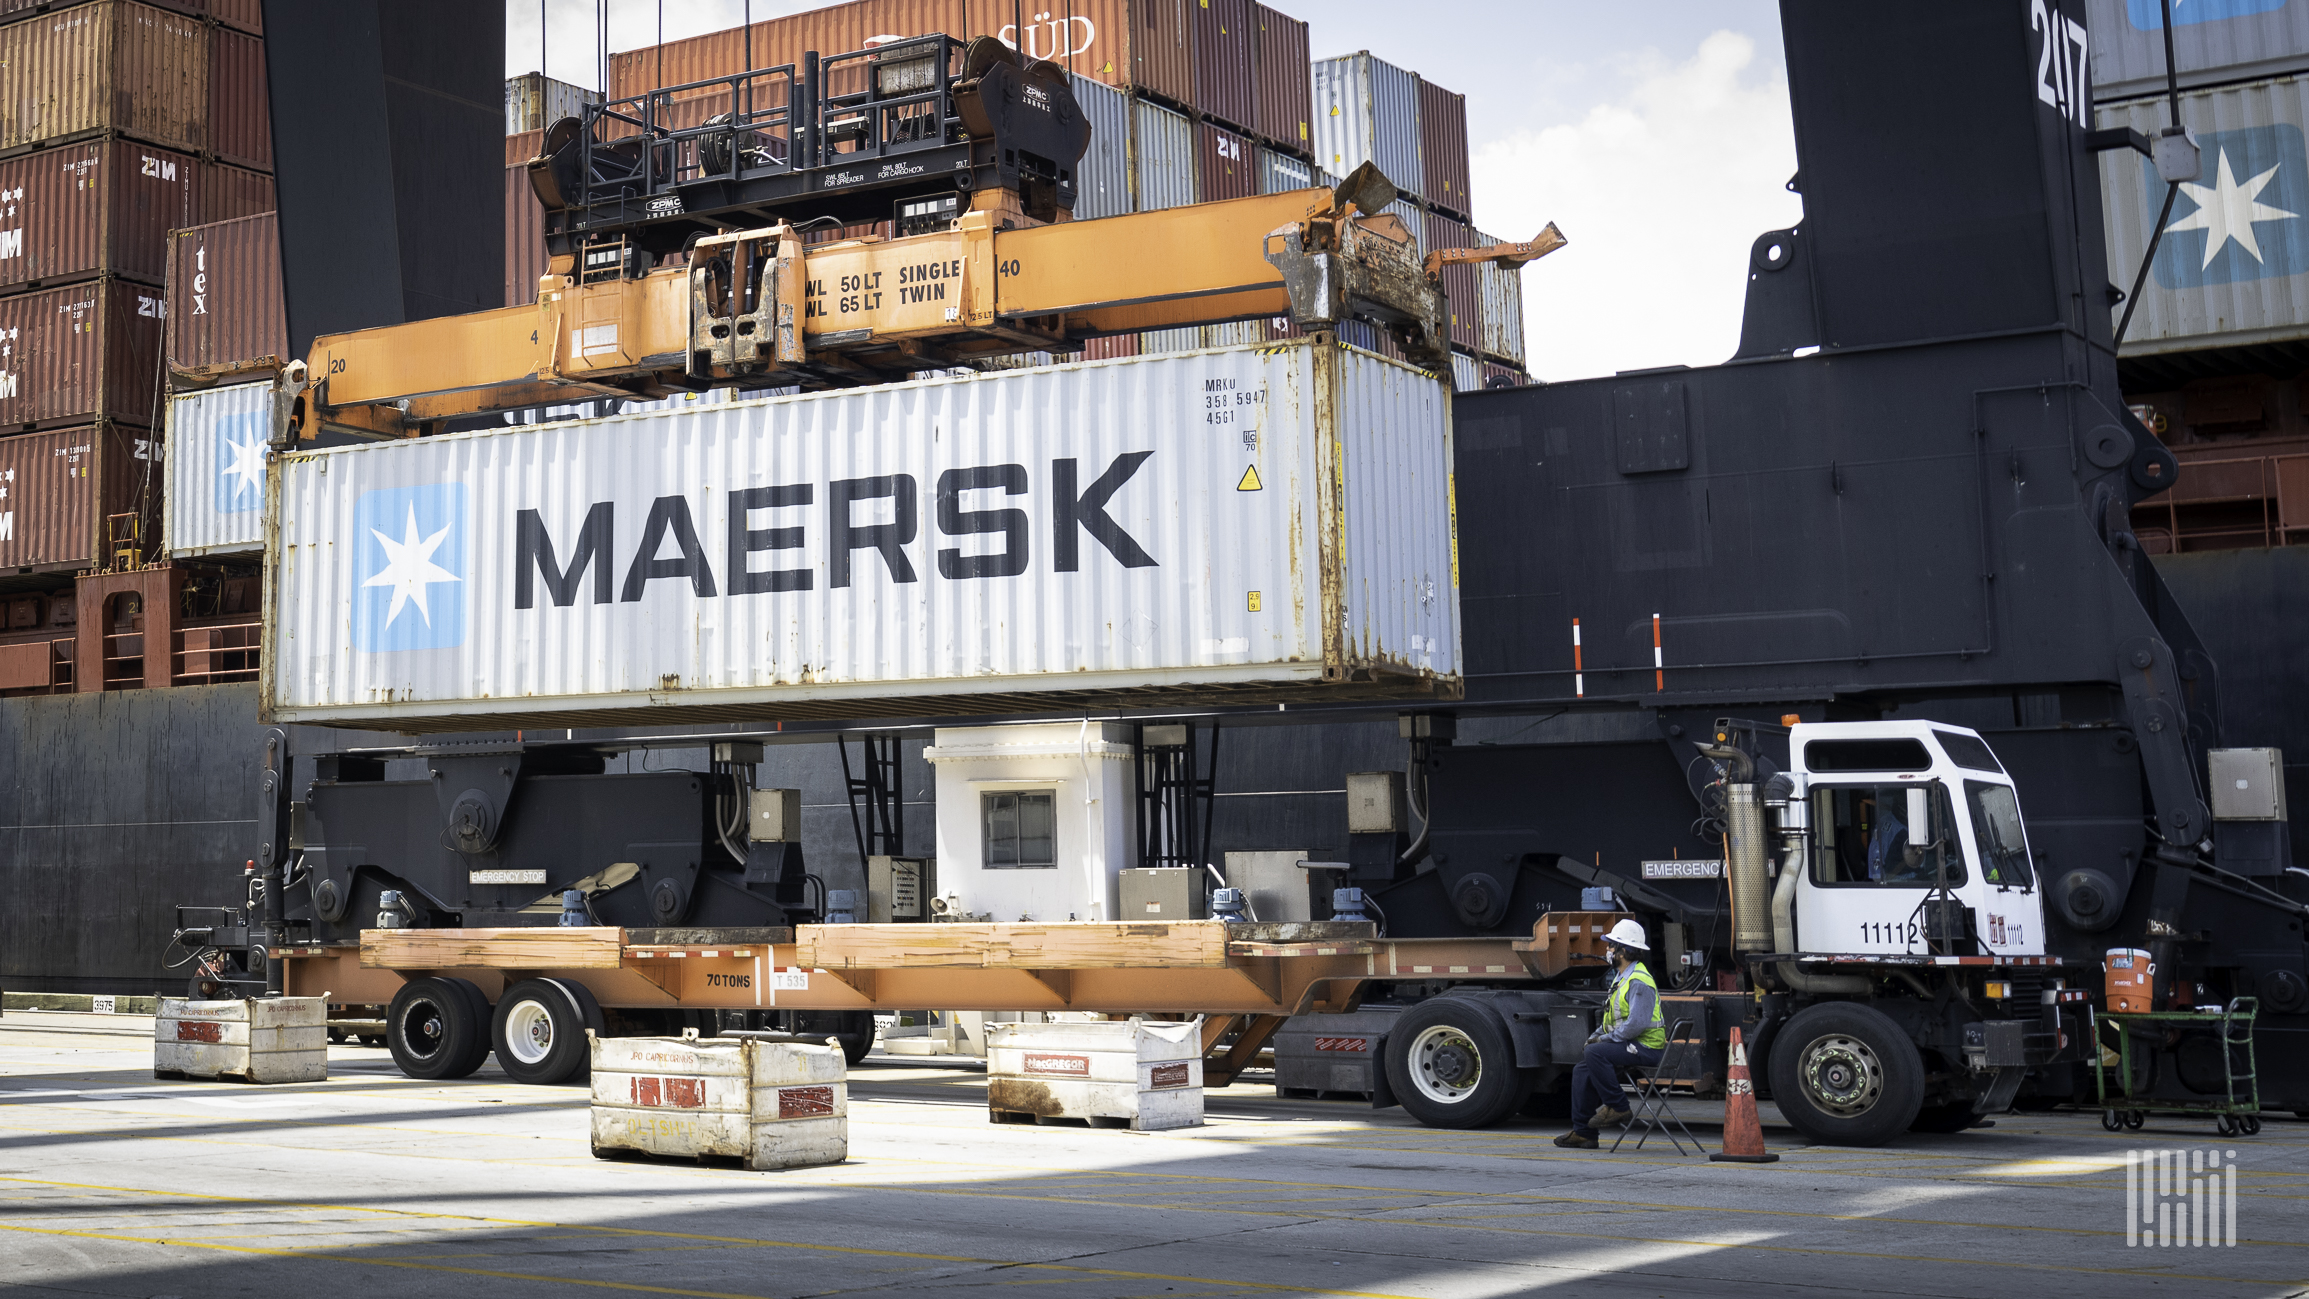 A Maersk shipping container is lowered on dock by a crane.